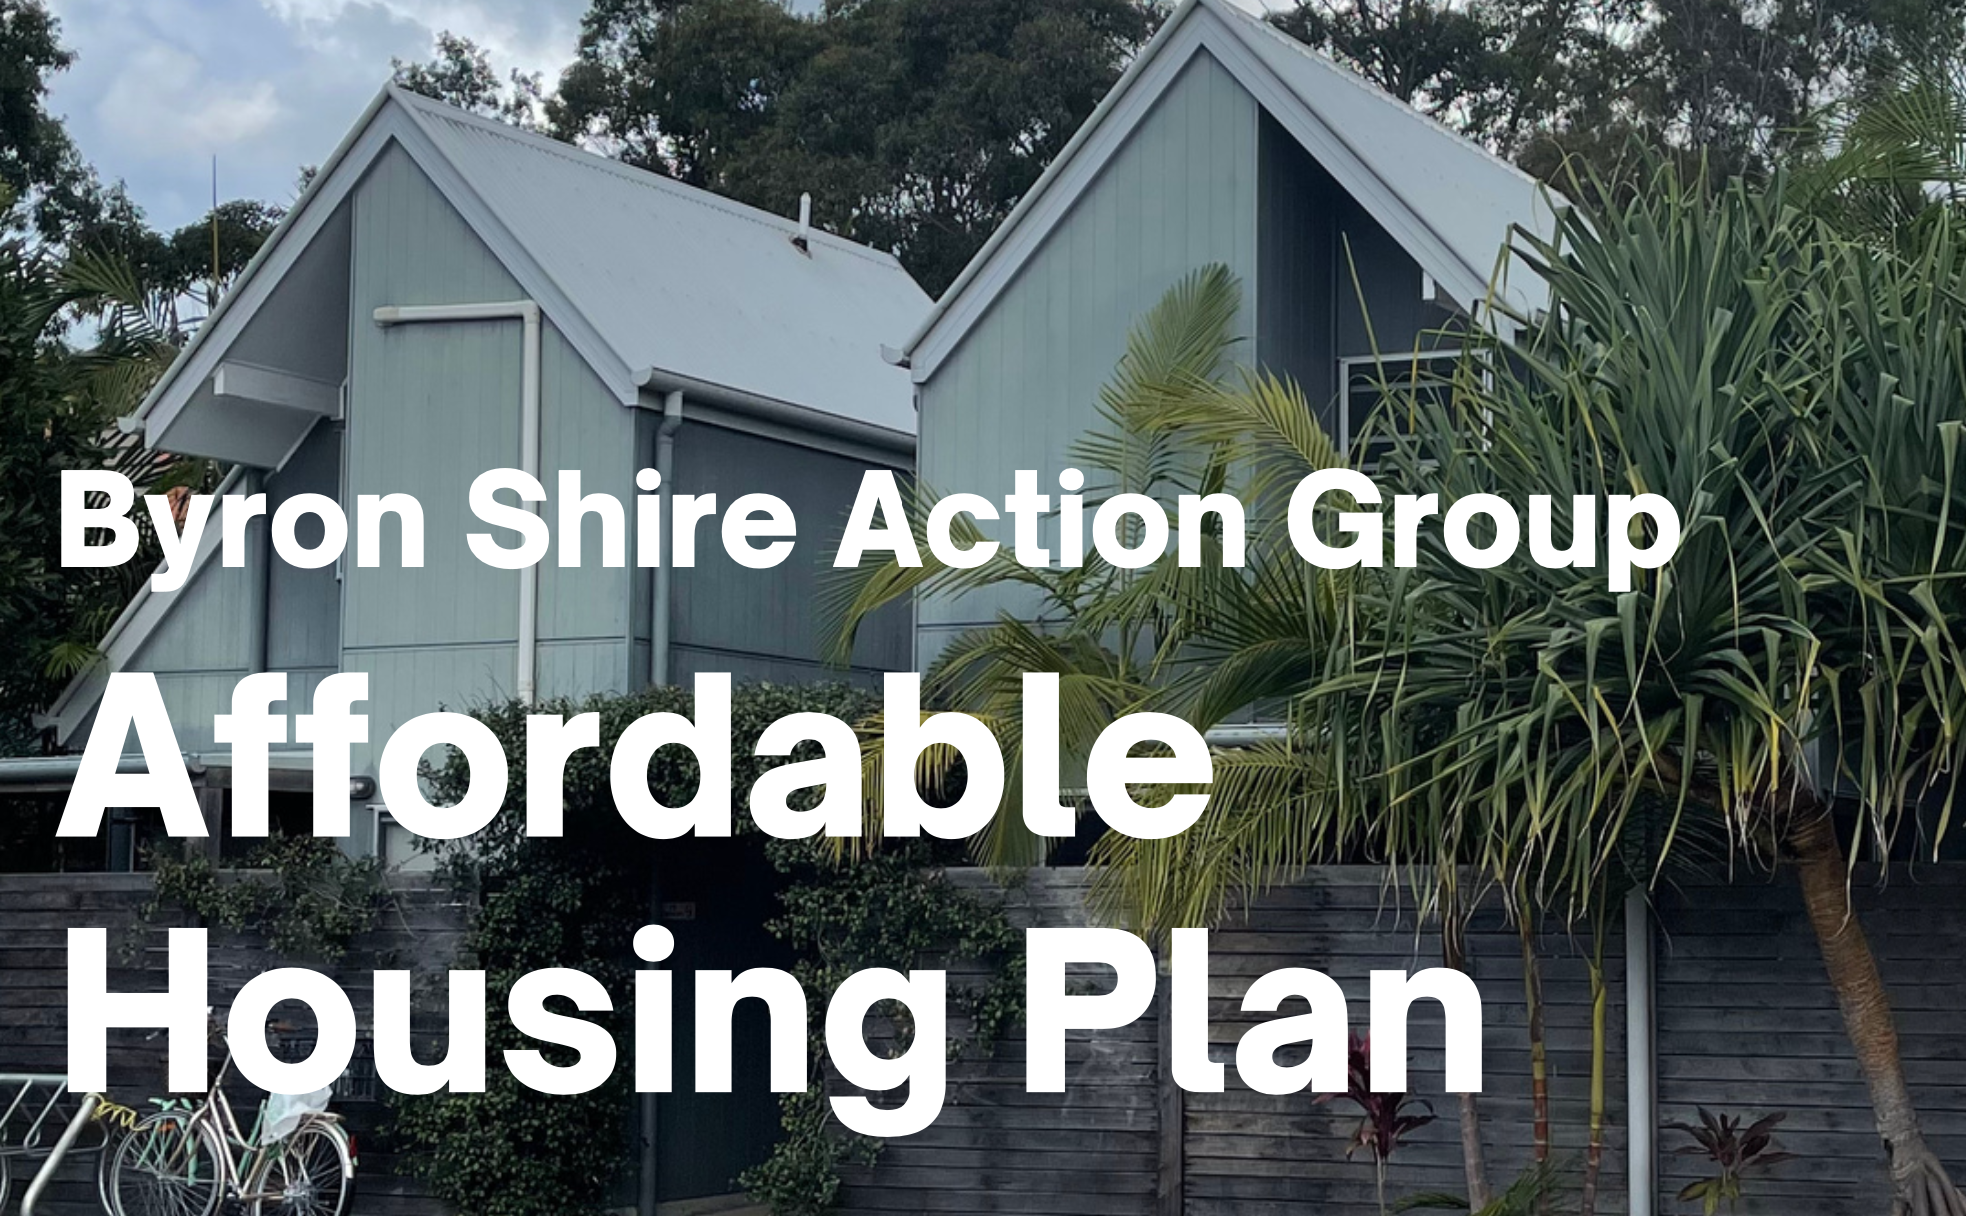 Byron Shire Action Group releases affordable housing plan